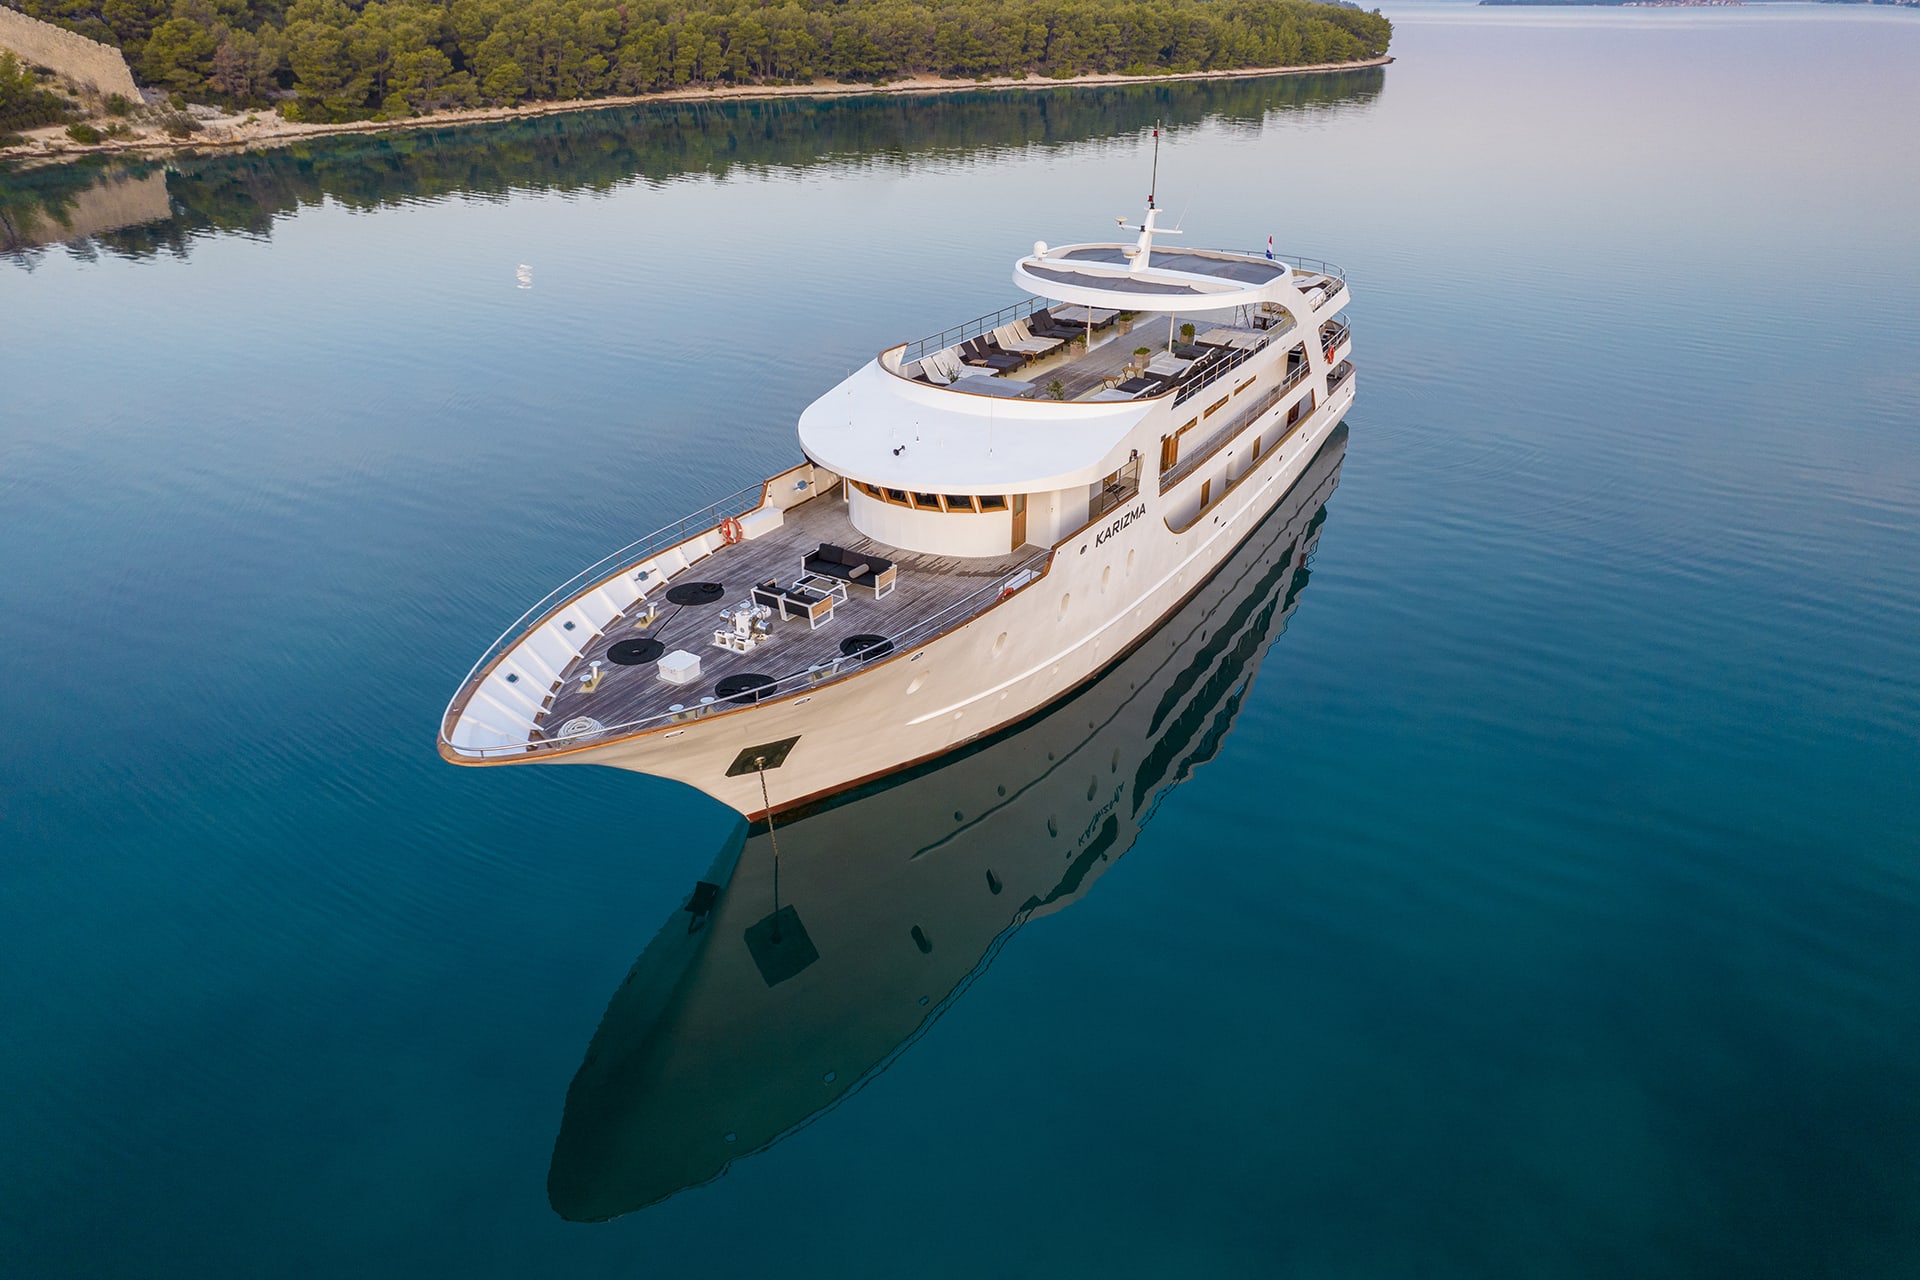 DS Yacht Karizma - the best value for money charter experience